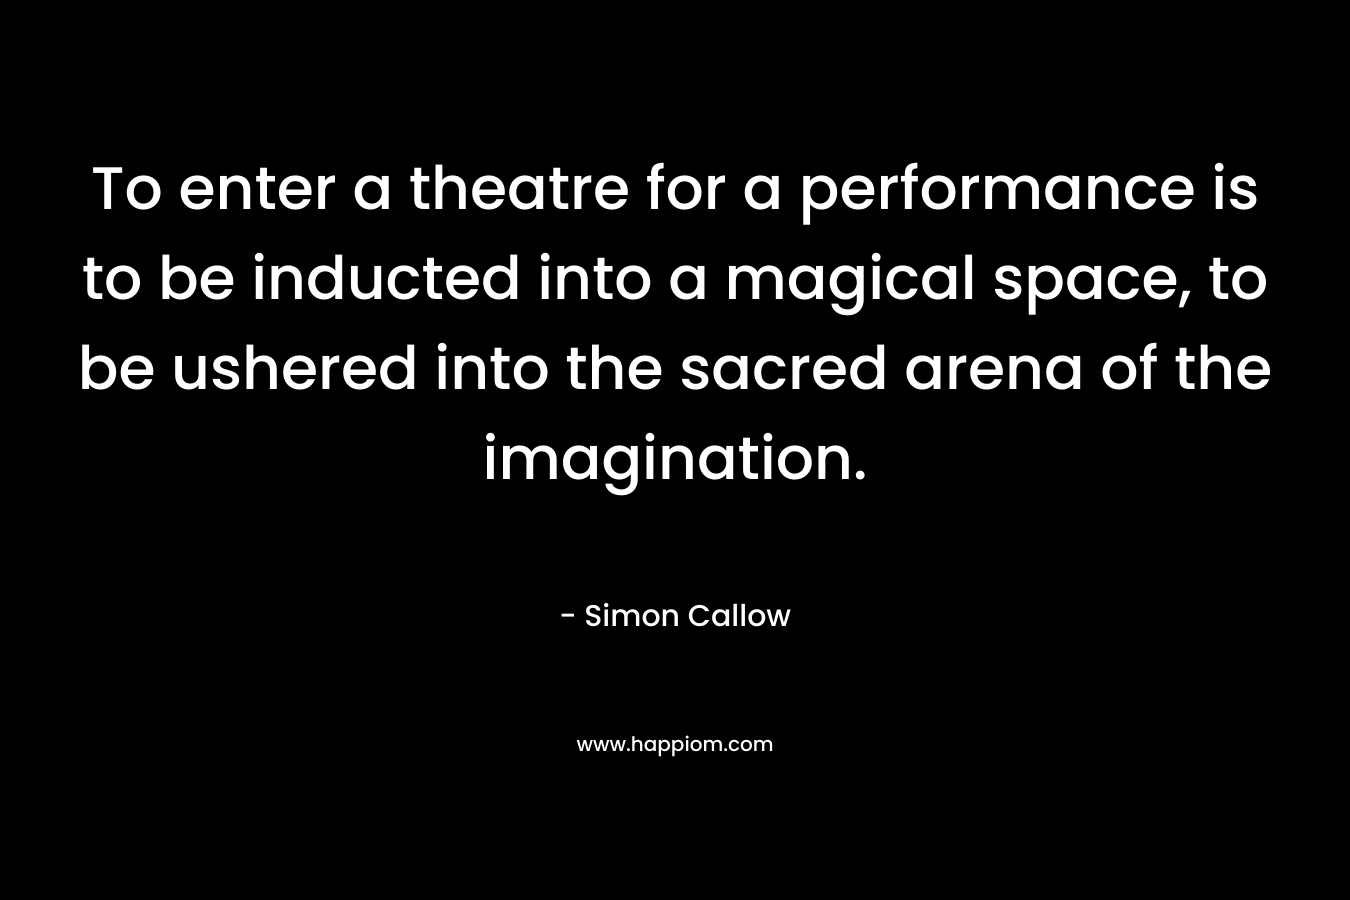 To enter a theatre for a performance is to be inducted into a magical space, to be ushered into the sacred arena of the imagination. – Simon Callow